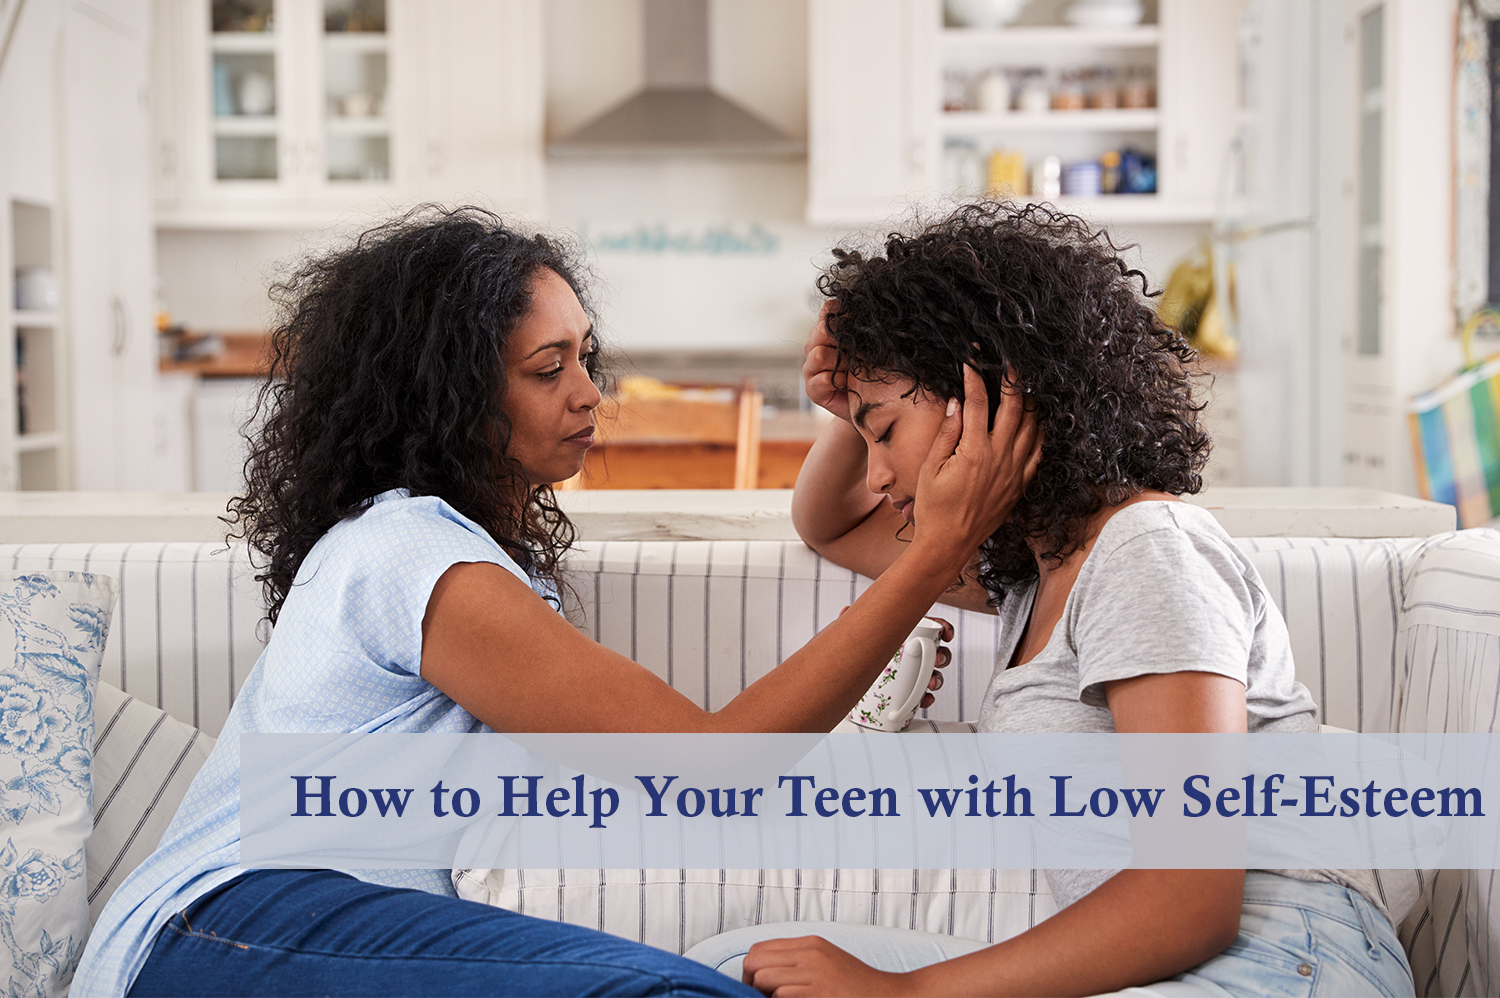 Teen with low self-esteem talking to her mom on a couch next to their kitchen.